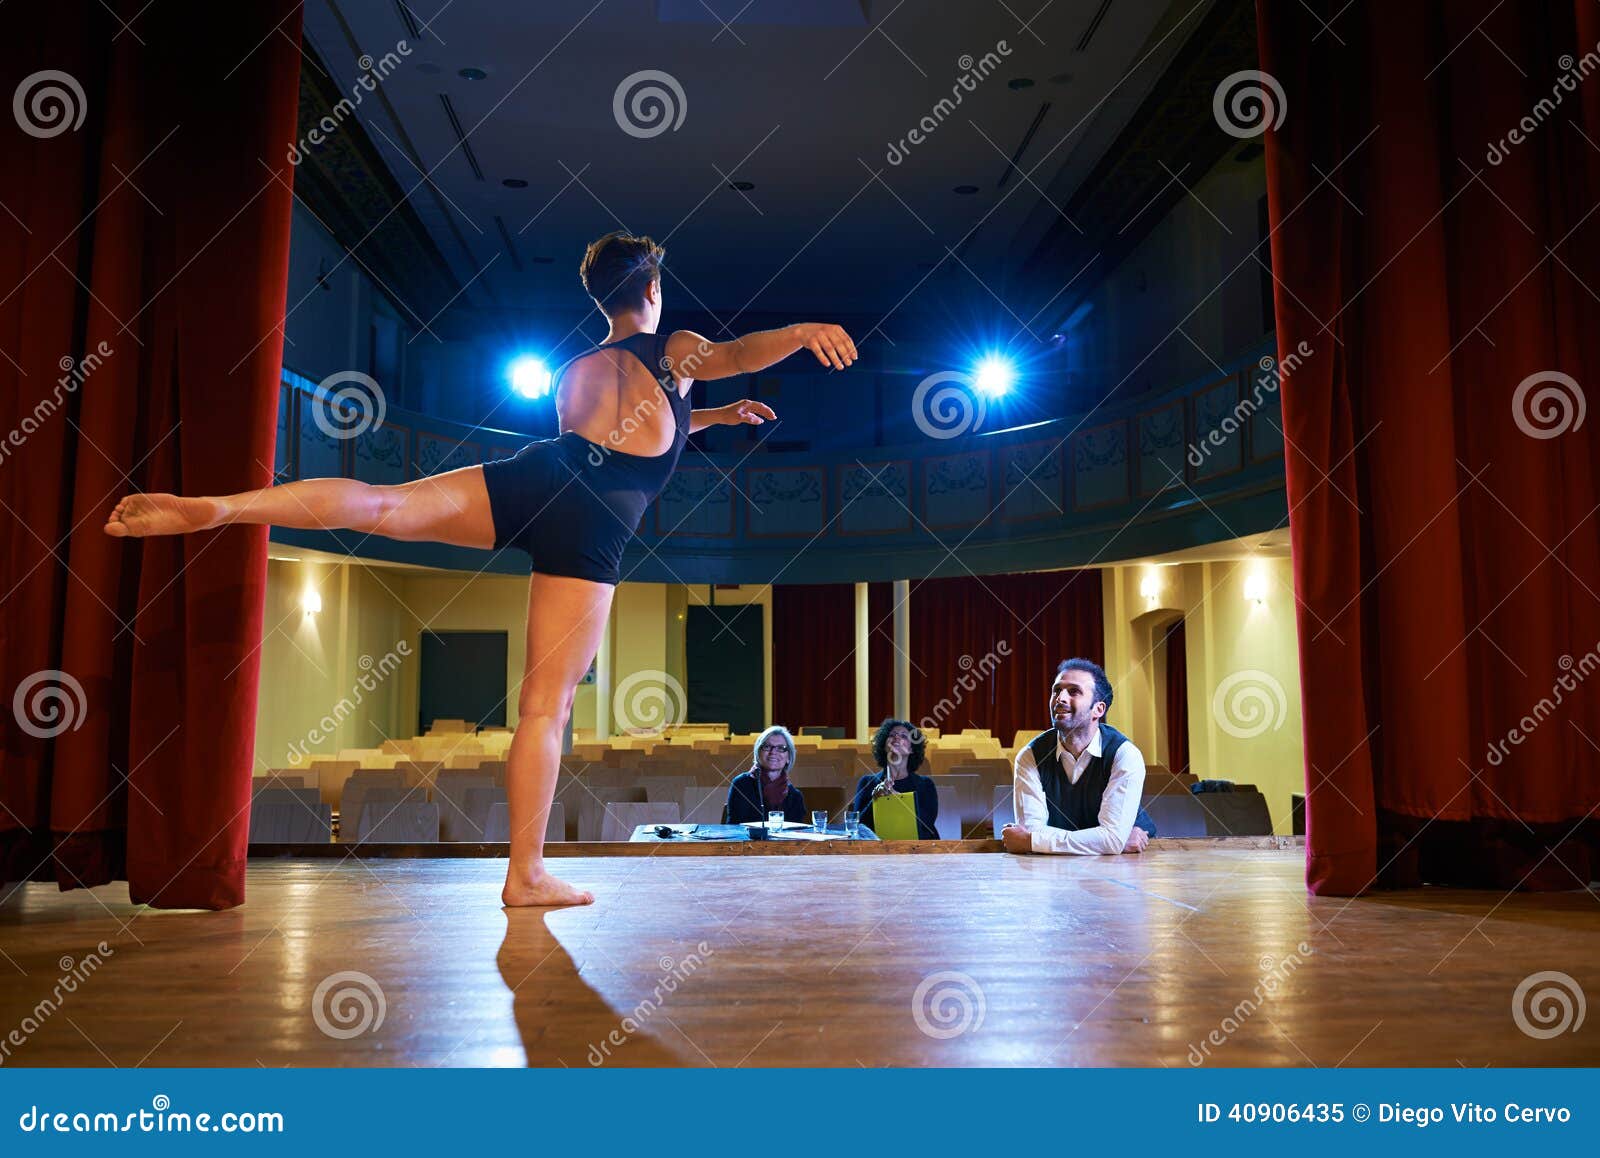 woman dancing for audition with jury in theater